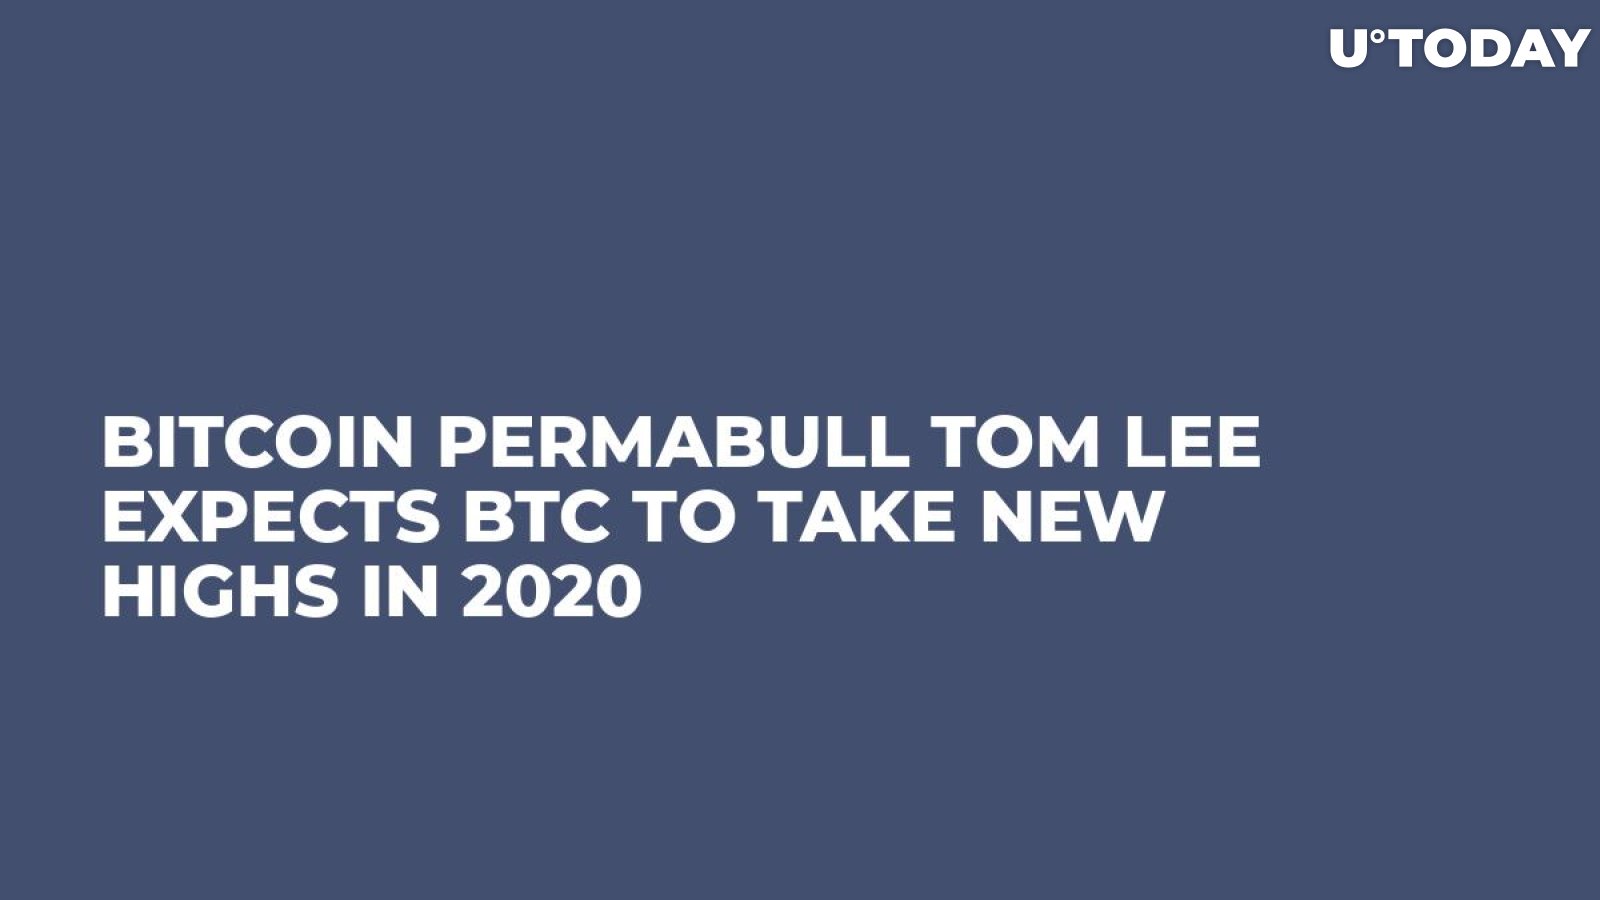 Bitcoin Permabull Tom Lee Expects BTC to Take New Highs in 2020